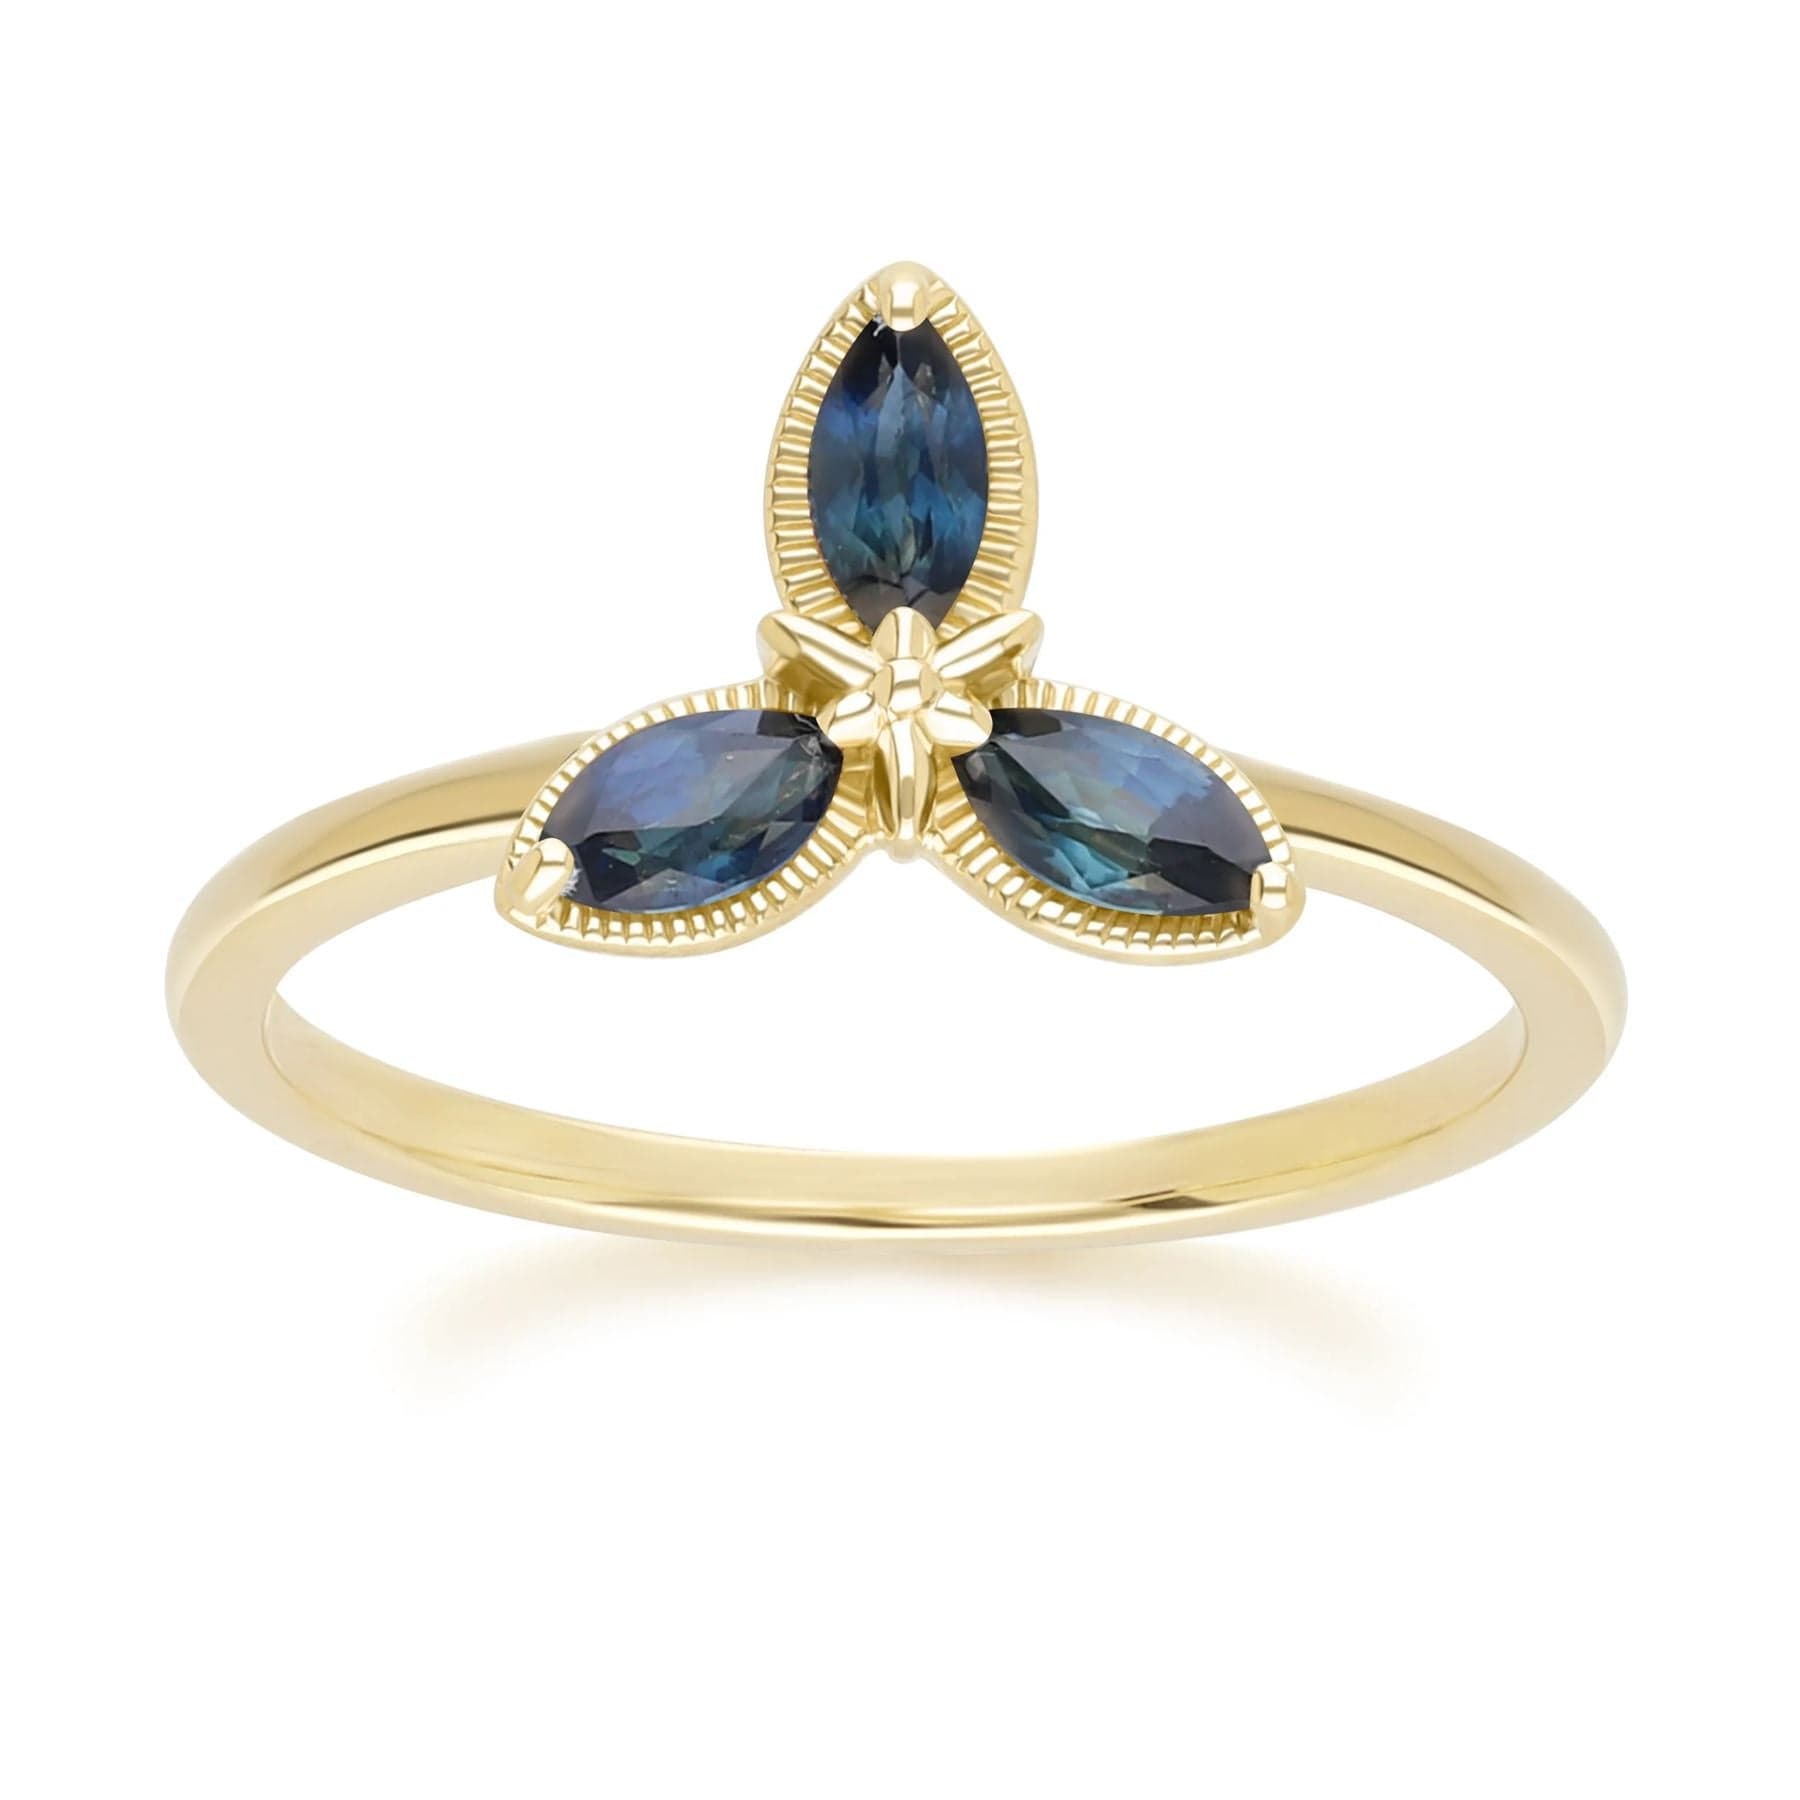 Floral Marquise Sapphire Ring in 9ct Yellow Gold